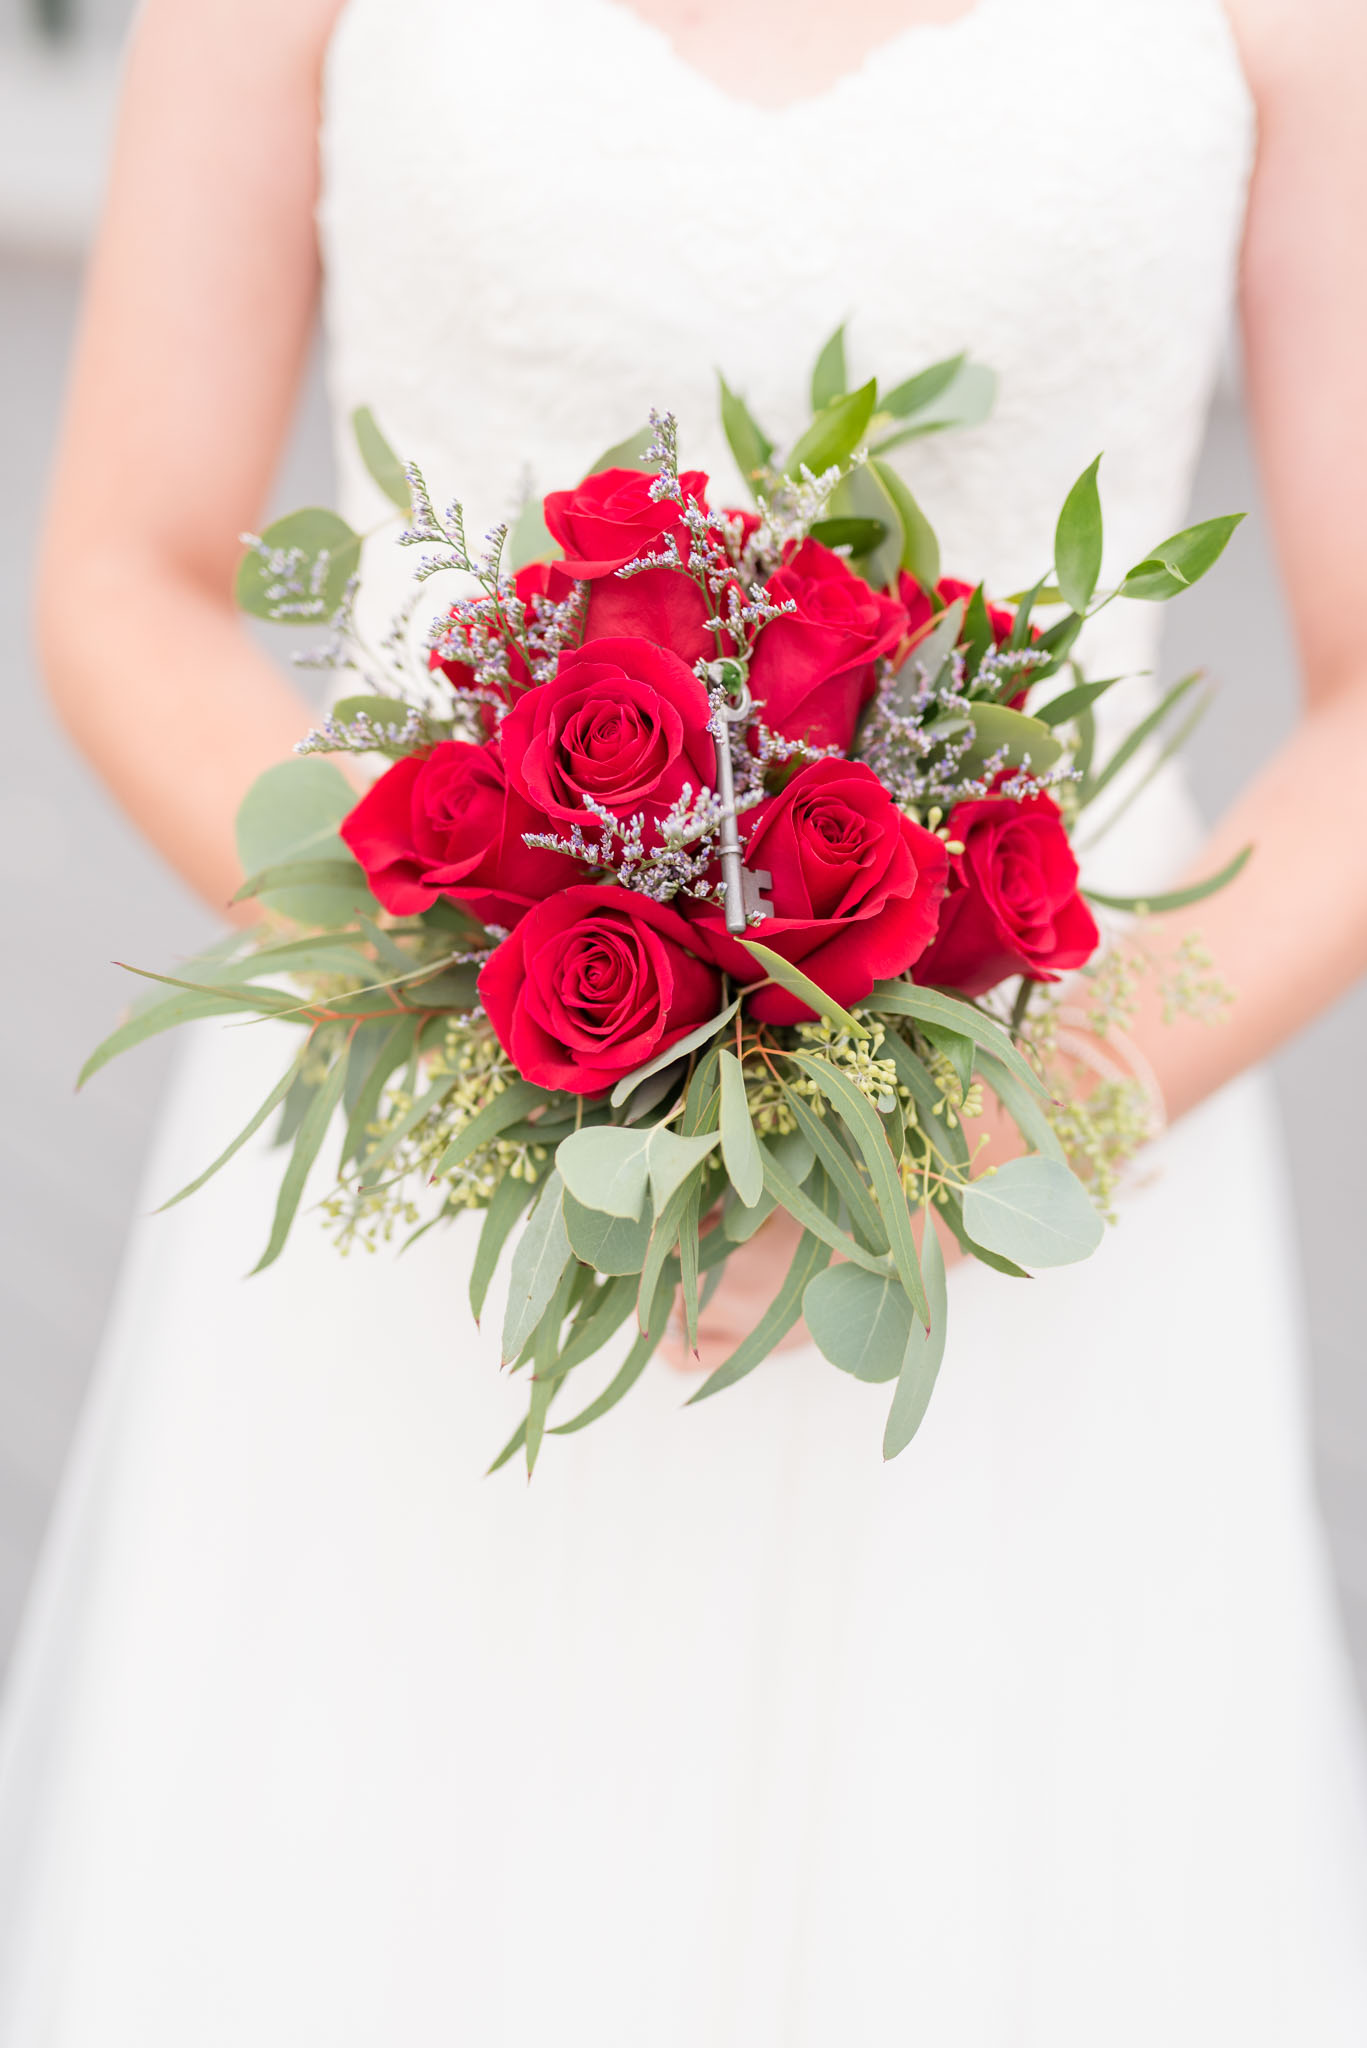 Bride holding Bouquet of Red Roses